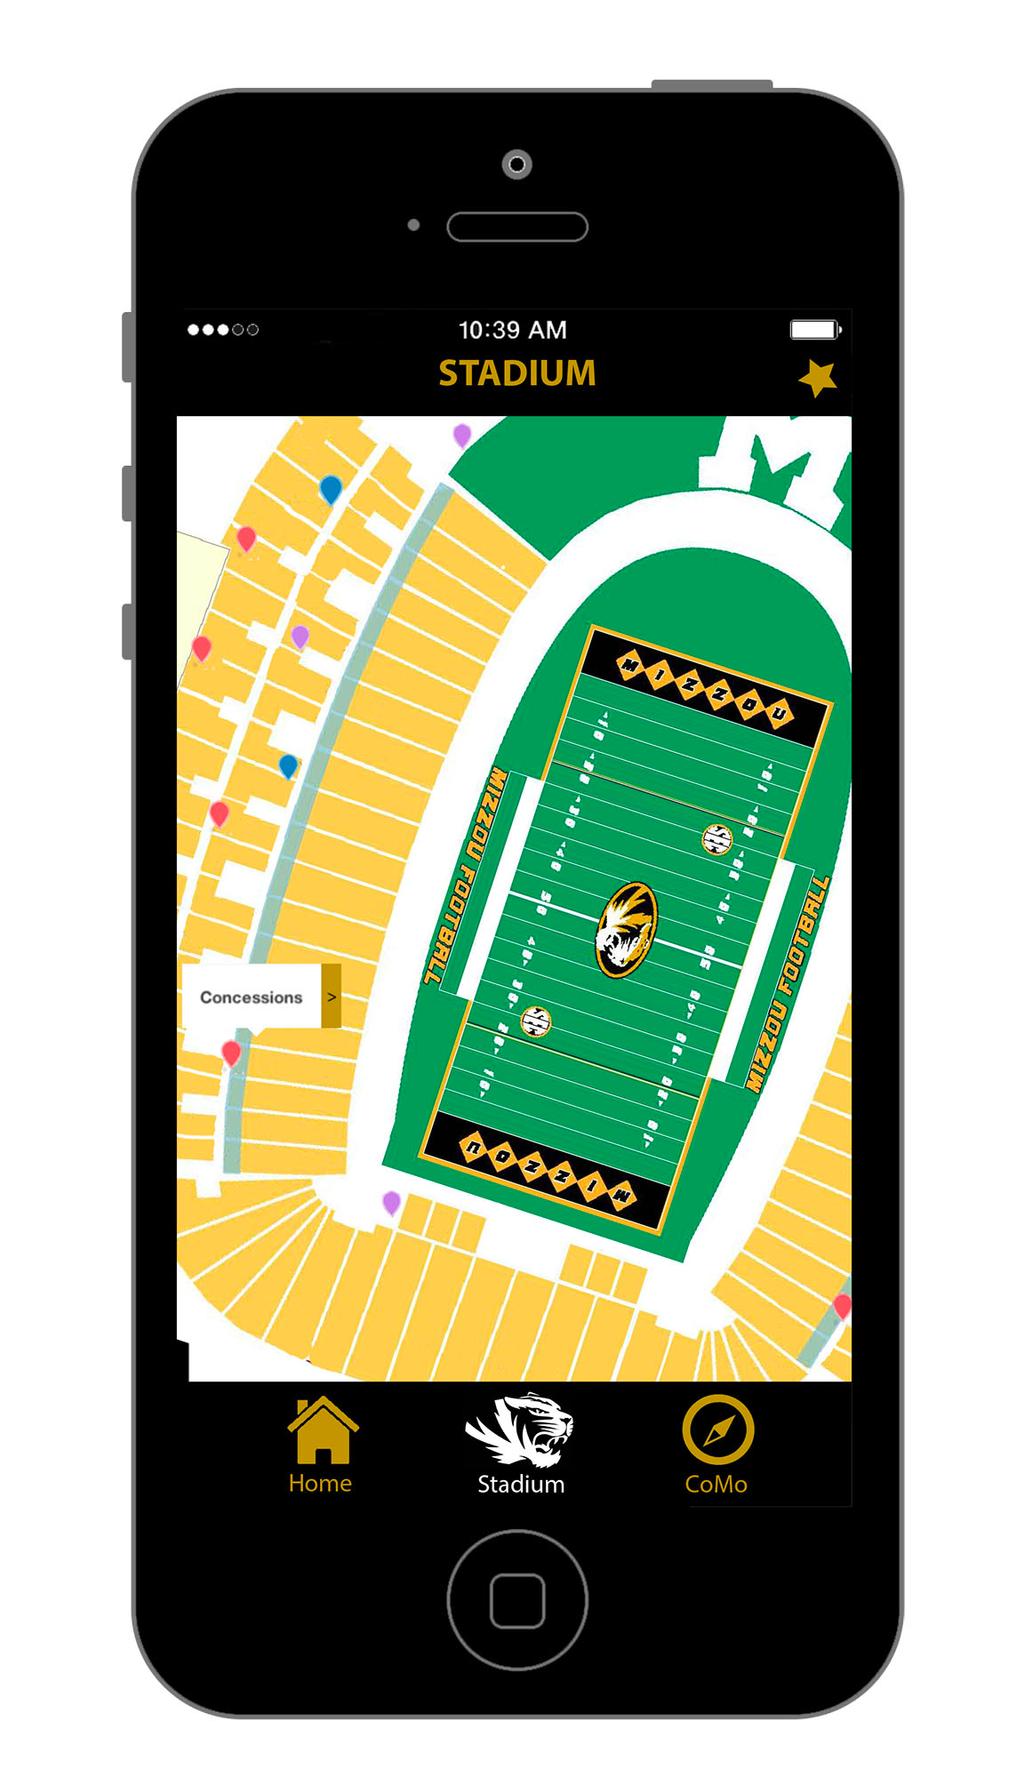 Capstone Final Paper - Google Drive Feature 3: Stadium Map The stadium map is similar to the CoMo map because of the pin feature.